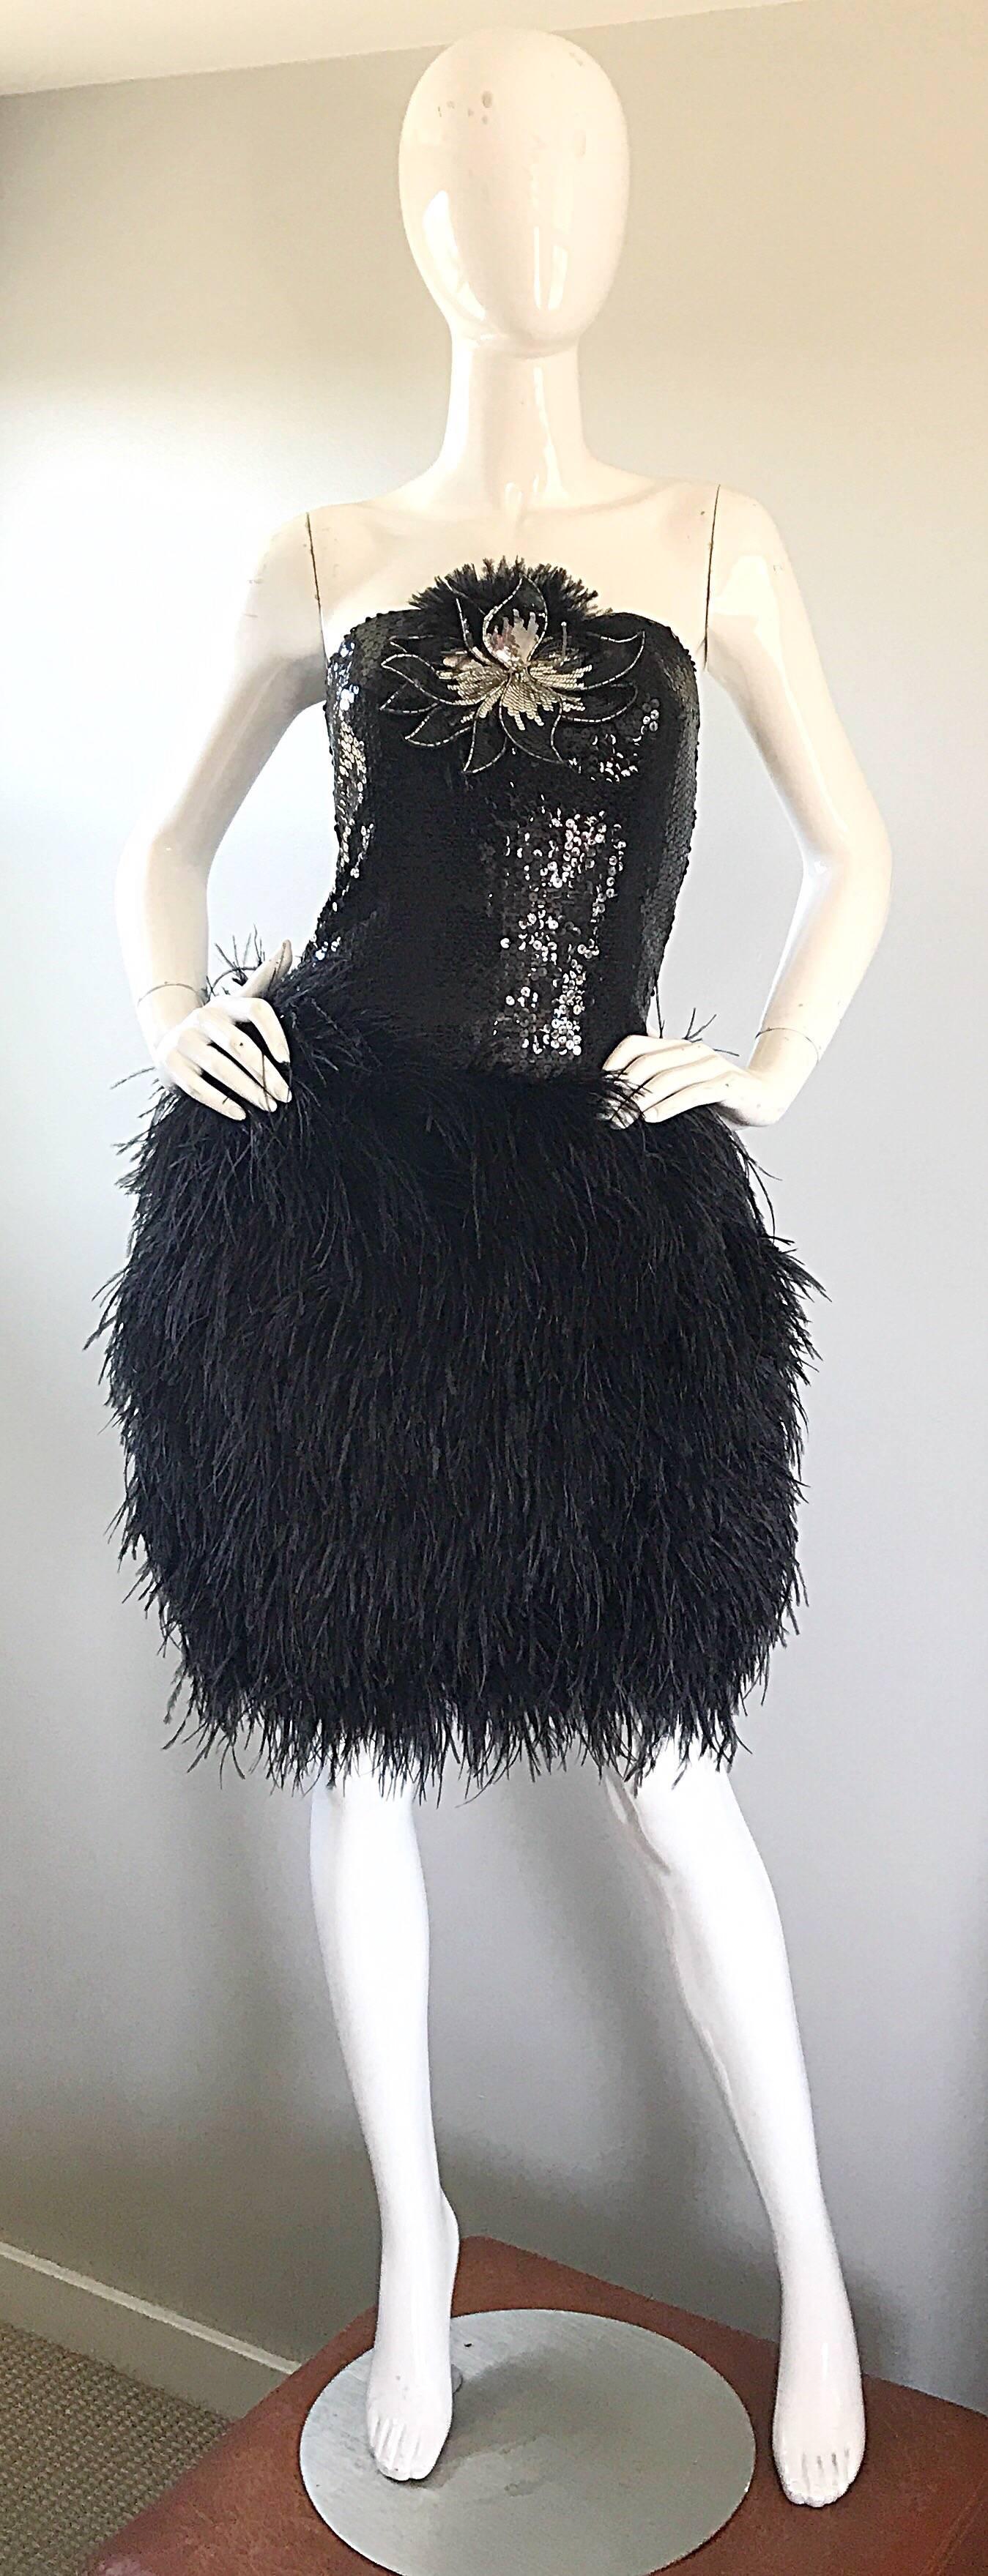 Amazing showstopping vintage 80s LILLIE RUBIN black sequin and ostrich feather strapless cocktail dress! Features thousands of hand-sewn sequins surrounding the front and back bodice. Fun and flirty black ostrich feather skirt. Avant Garde origami